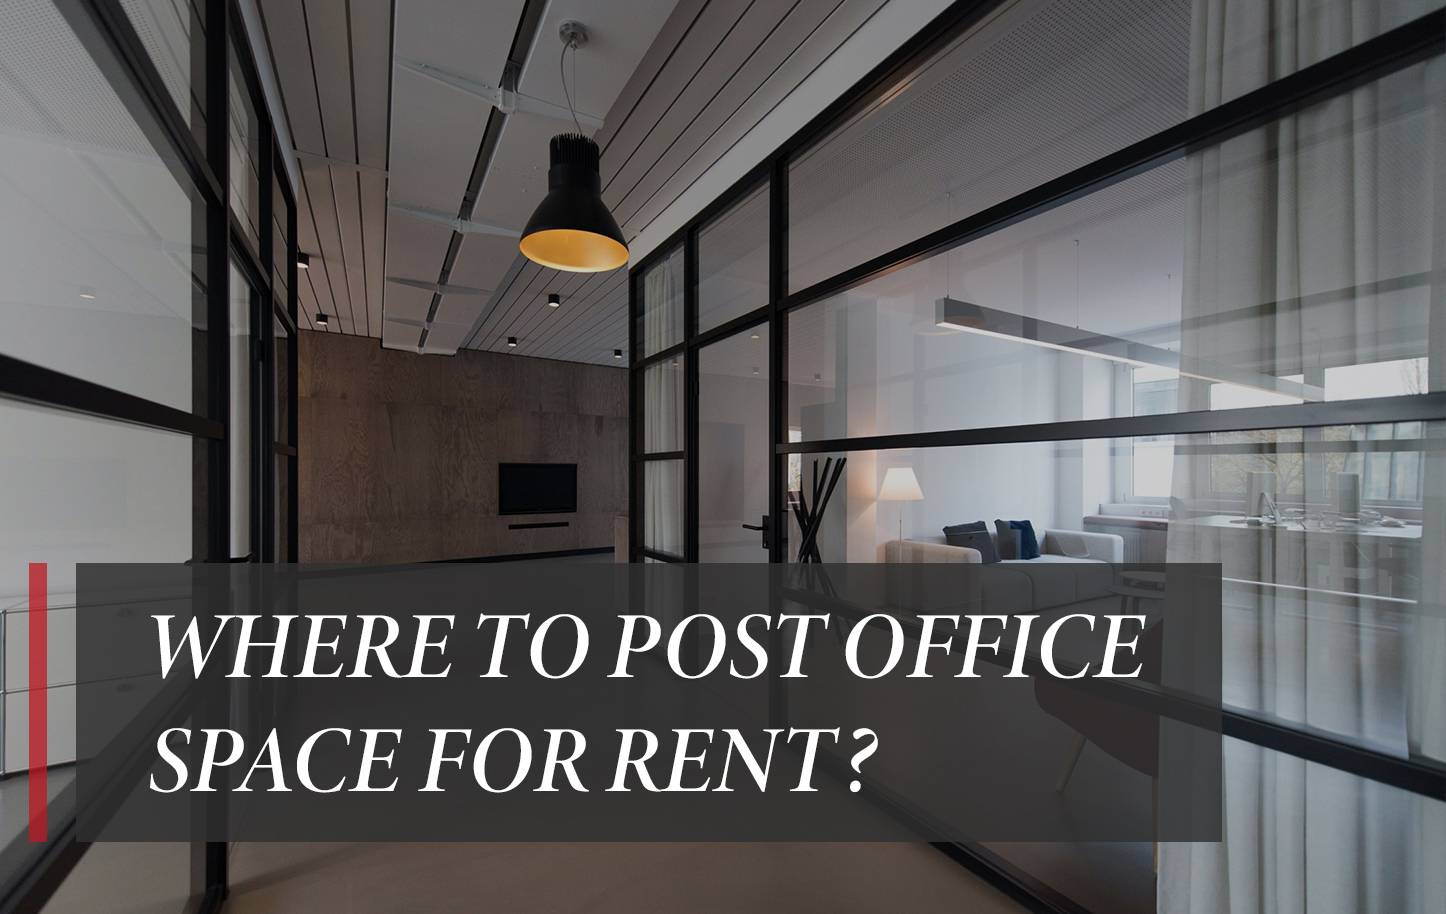 Where to post office space for rent?